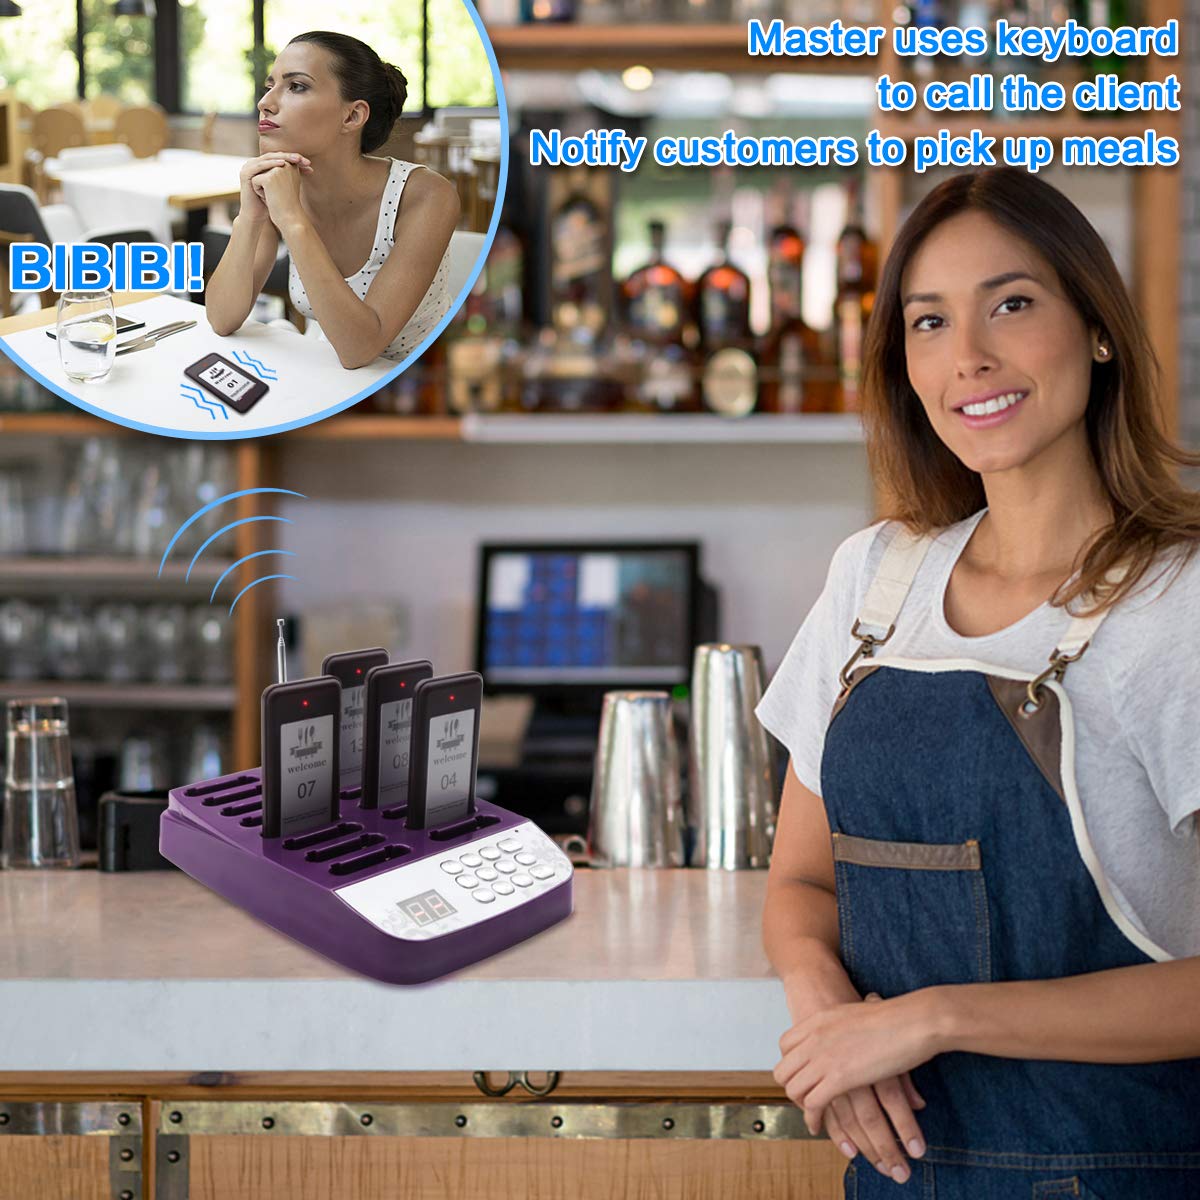 Daytech Restaurant Pager System Paging Buzzer System Beepers Wireless 